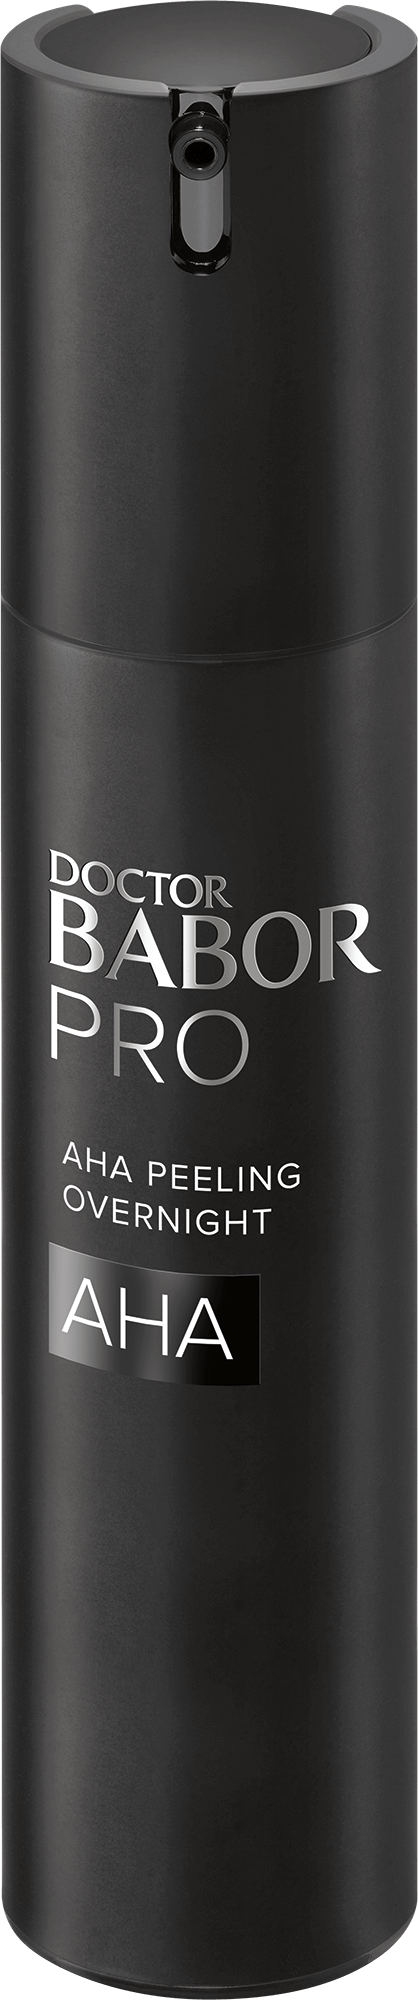 BABOR | AHA PEELING OVERNIGHT | Now in the official BABOR Online Shop